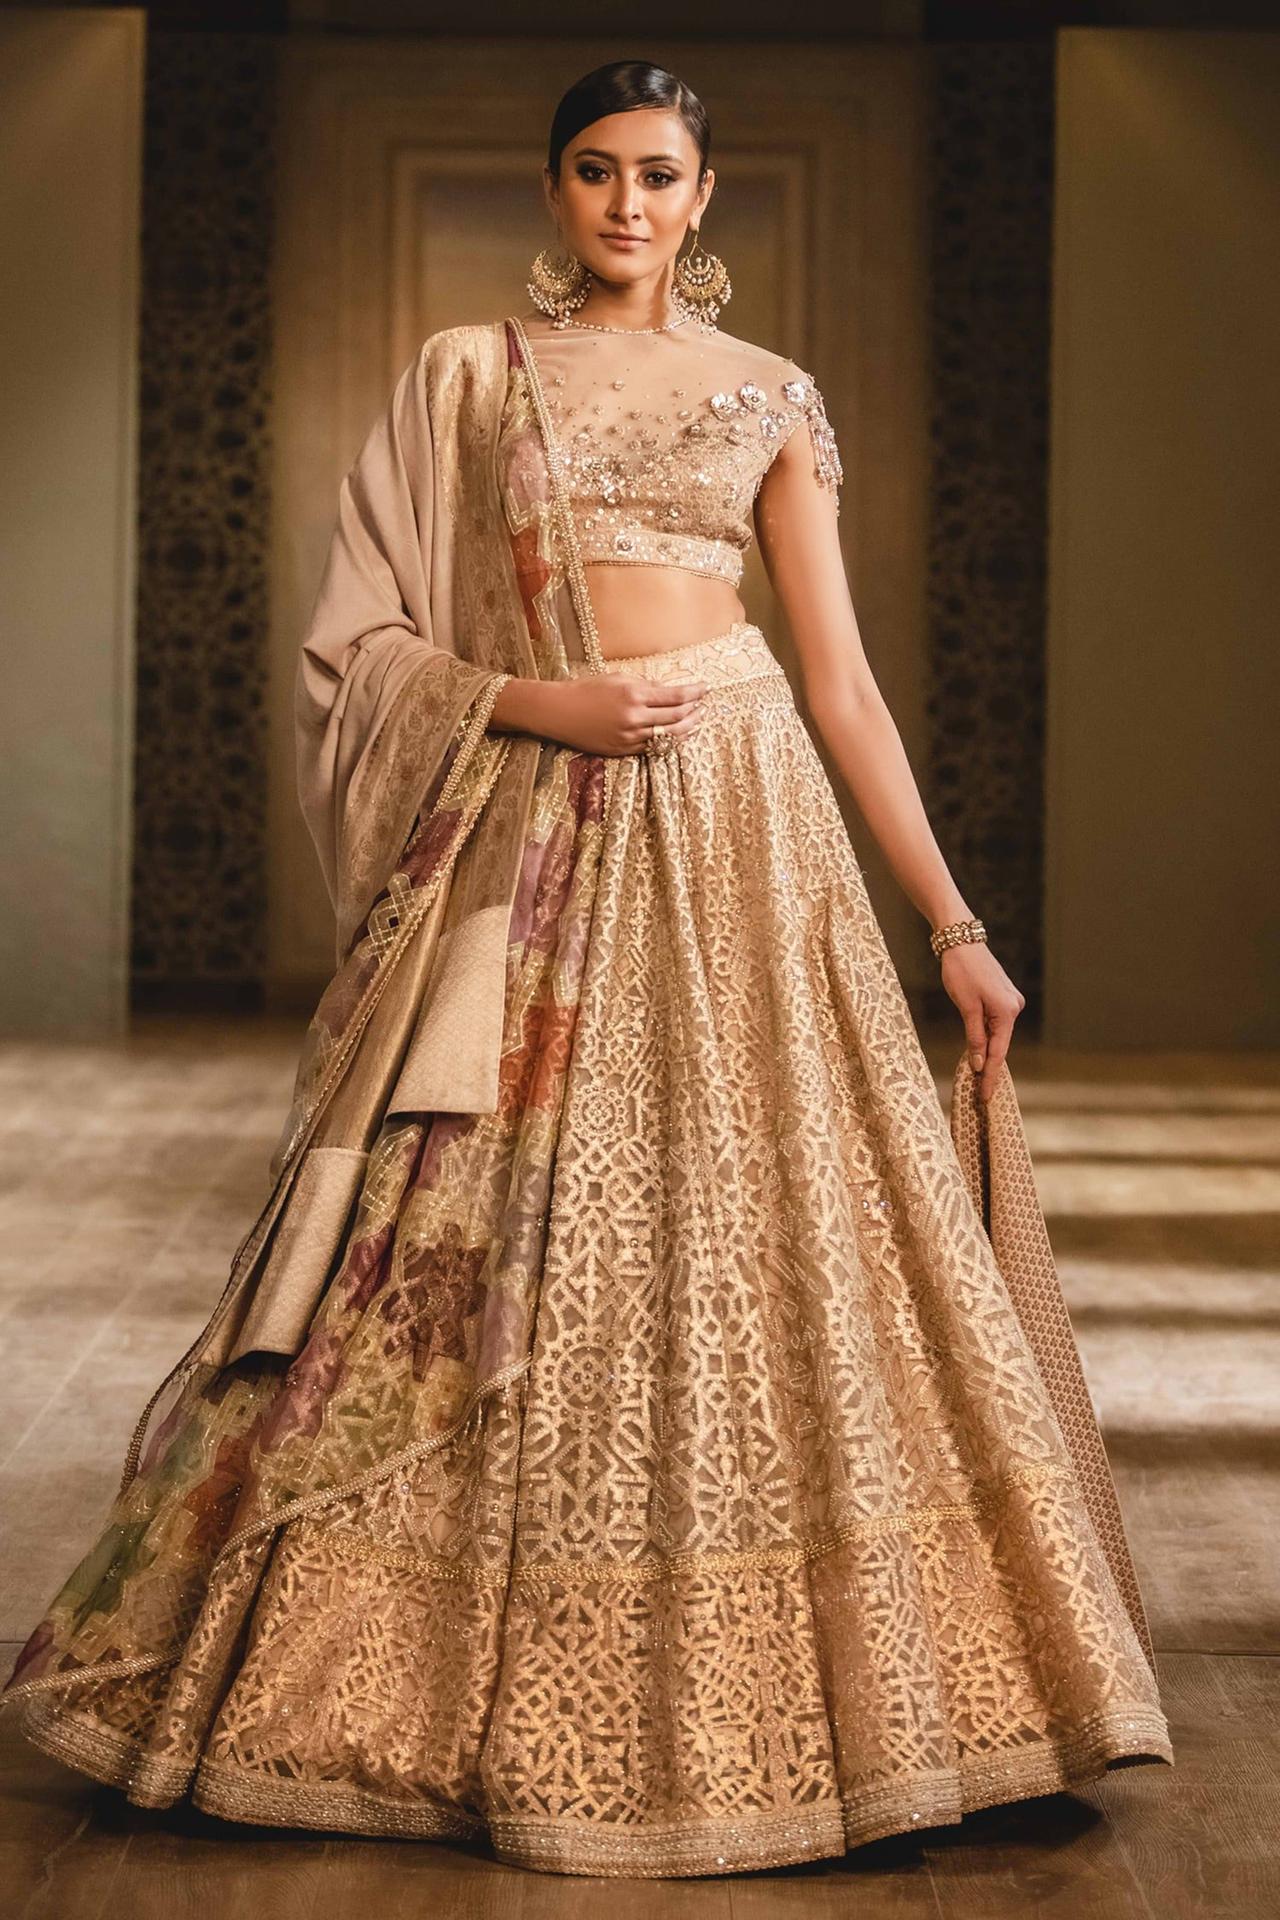 Prettiest Golden Bridal Lehengas for Day Wedding! | Latest bridal lehenga  designs, Latest bridal lehenga, Bridal outfits